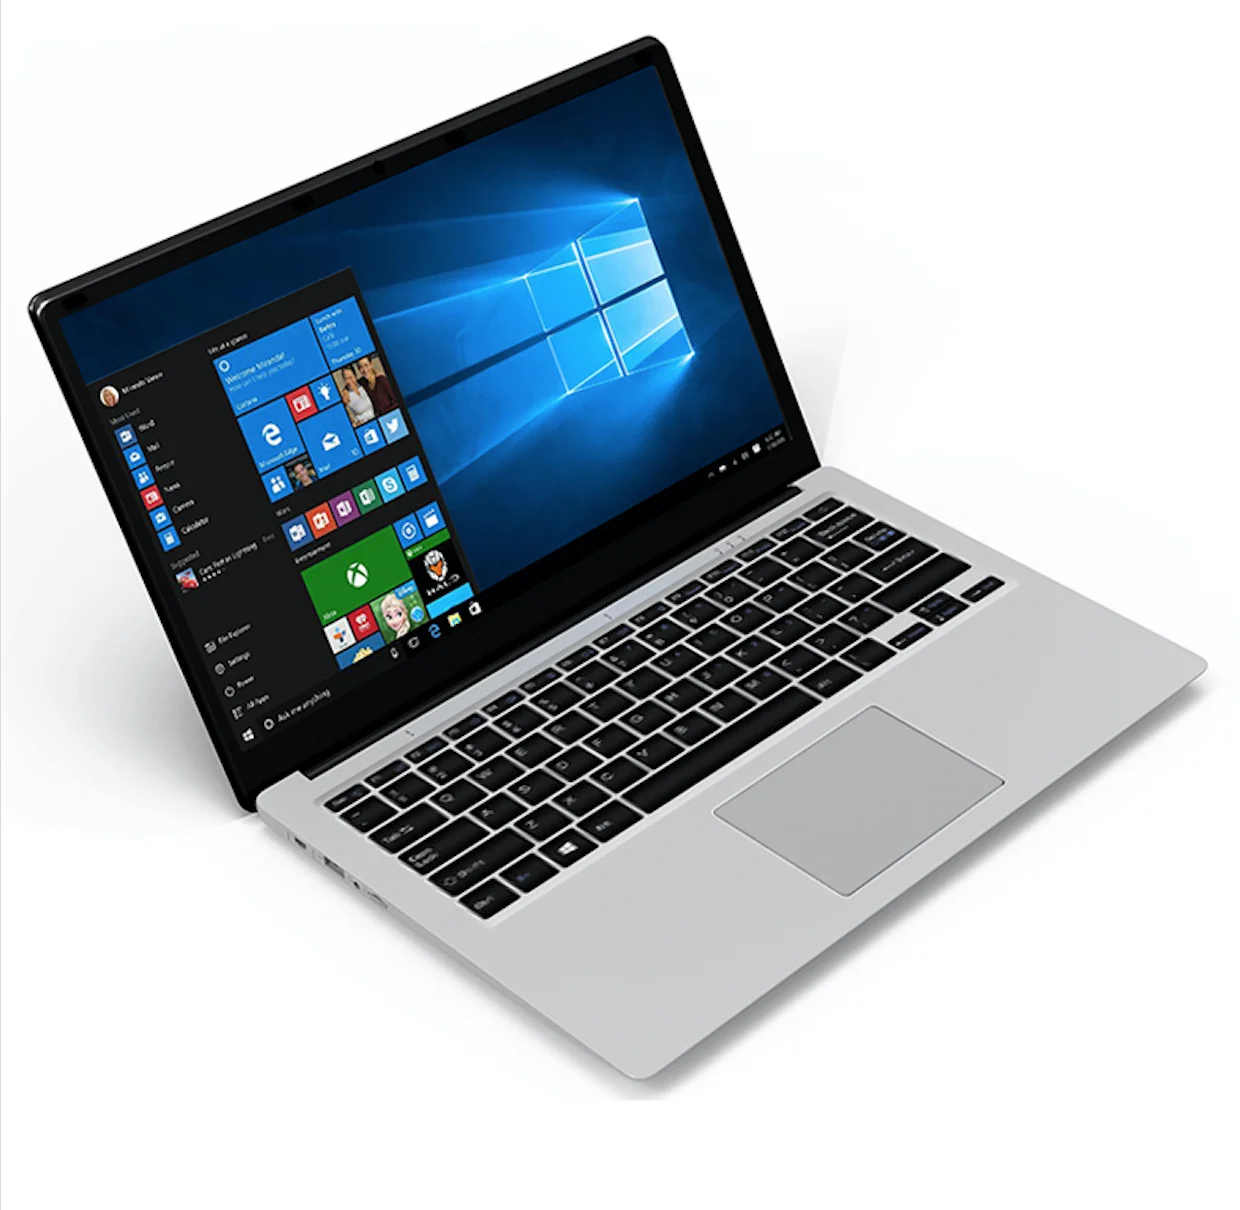 Hot selling 15.6 inch laptop Core i5 Notebook Core i7 laptop computer with Win 10 OS laptop